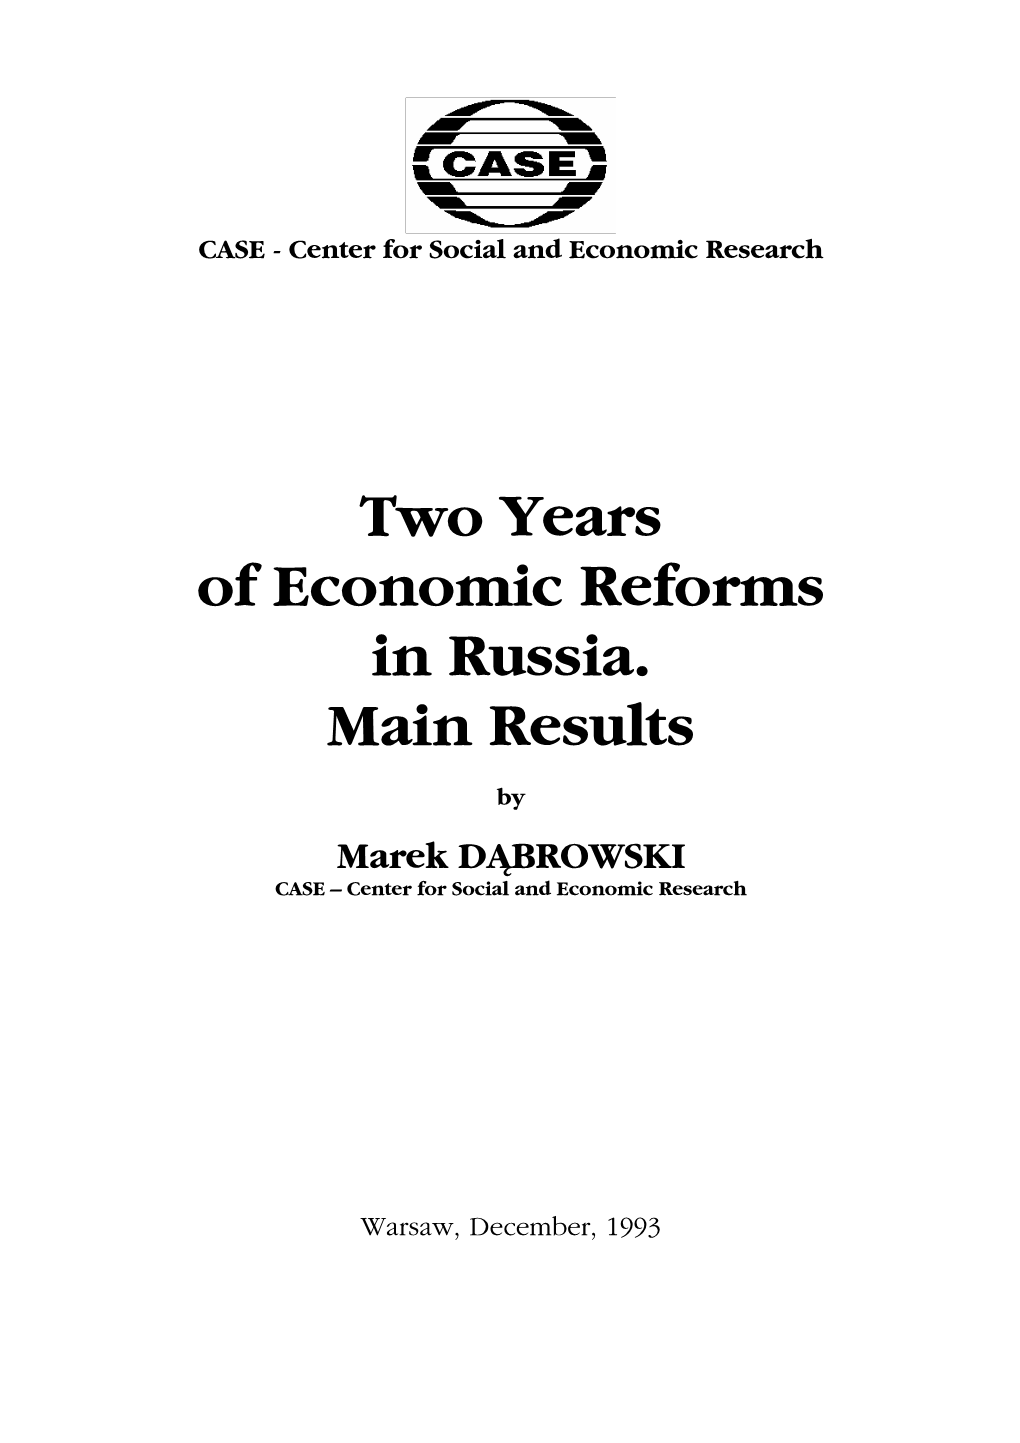 Two Years of Economic Reforms in Russia. Main Results